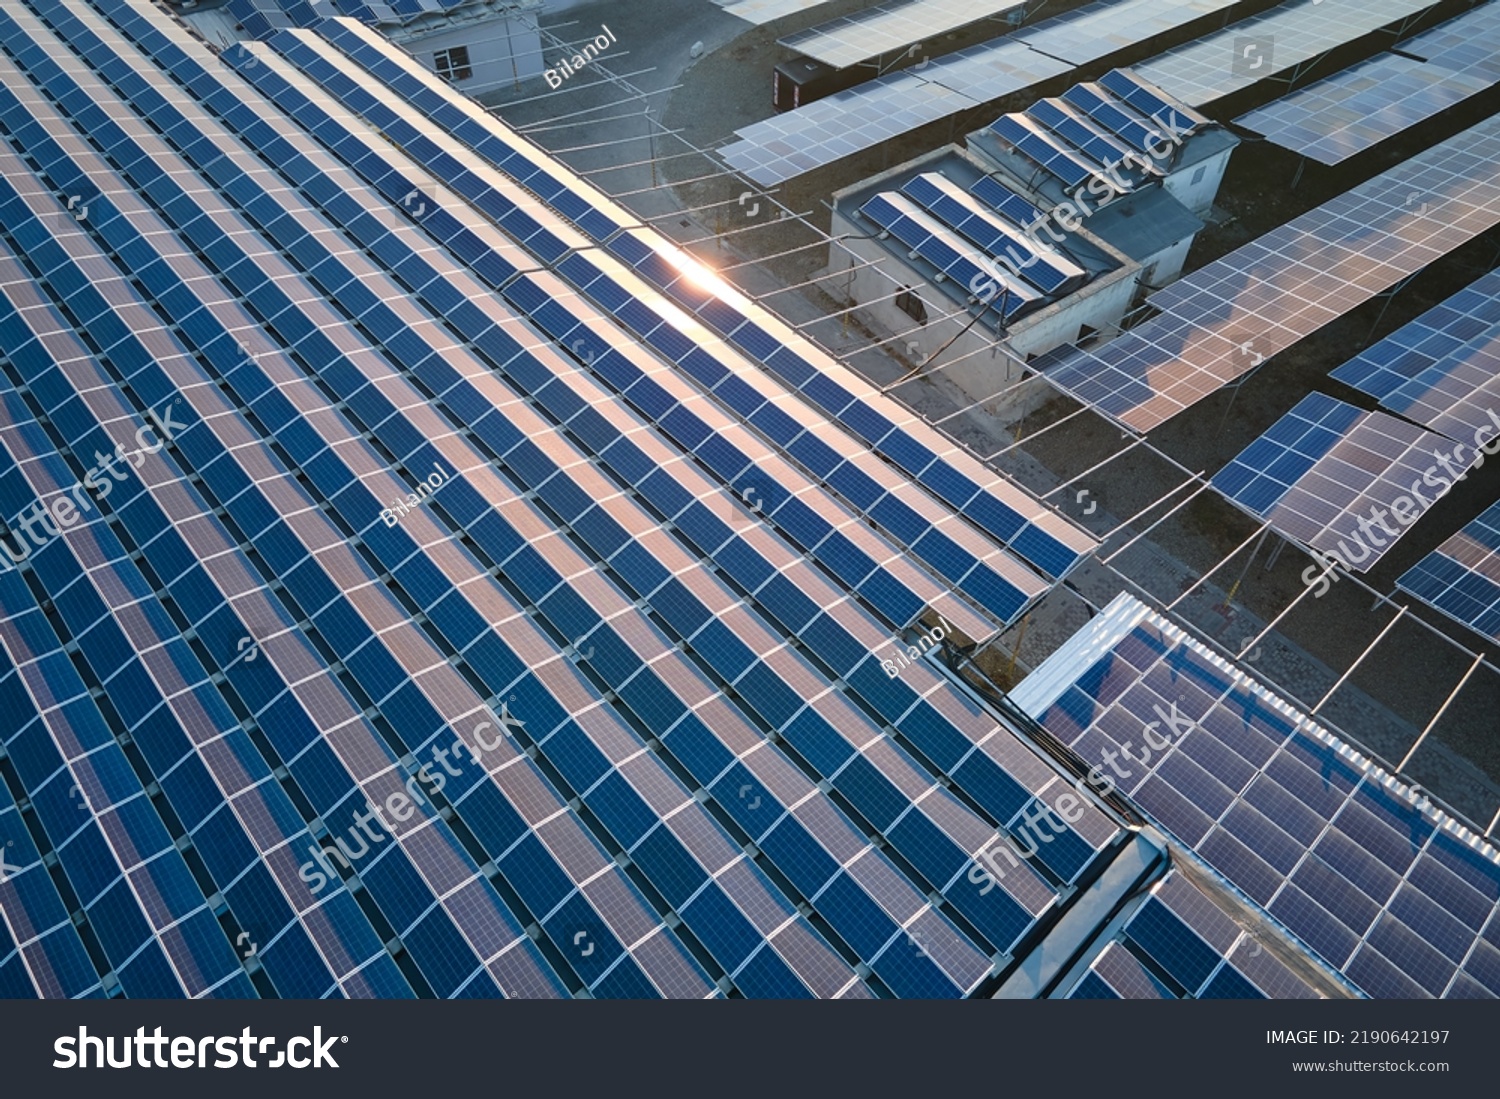 Aerial view of solar power plant with blue photovoltaic panels mounted on industrial building roof for producing green ecological electricity. Production of sustainable energy concept #2190642197